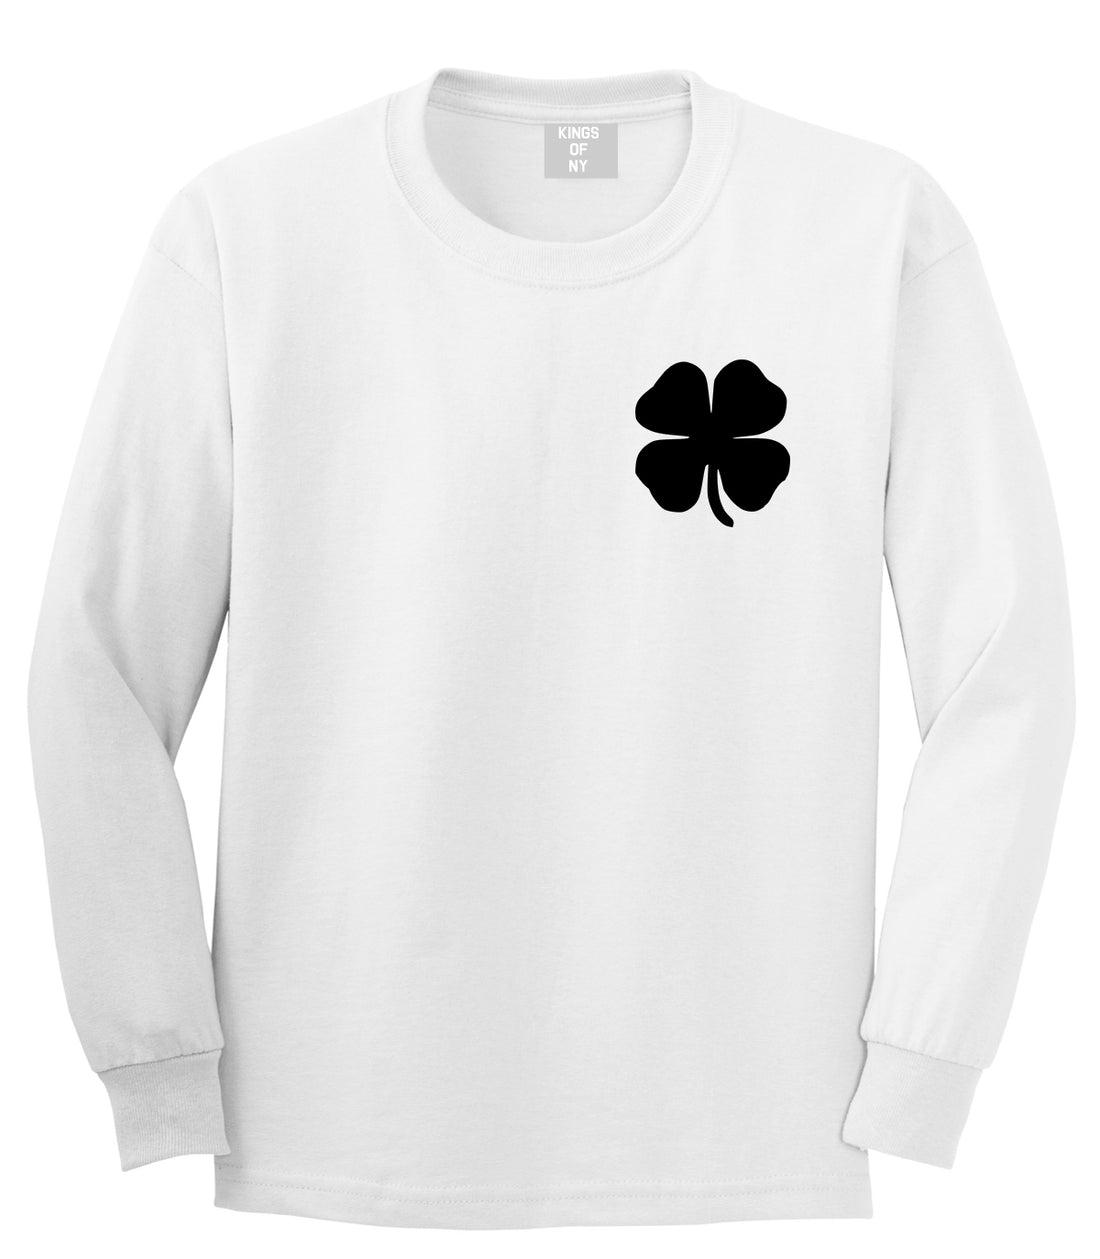 Four Leaf Clover Chest White Long Sleeve T-Shirt by Kings Of NY